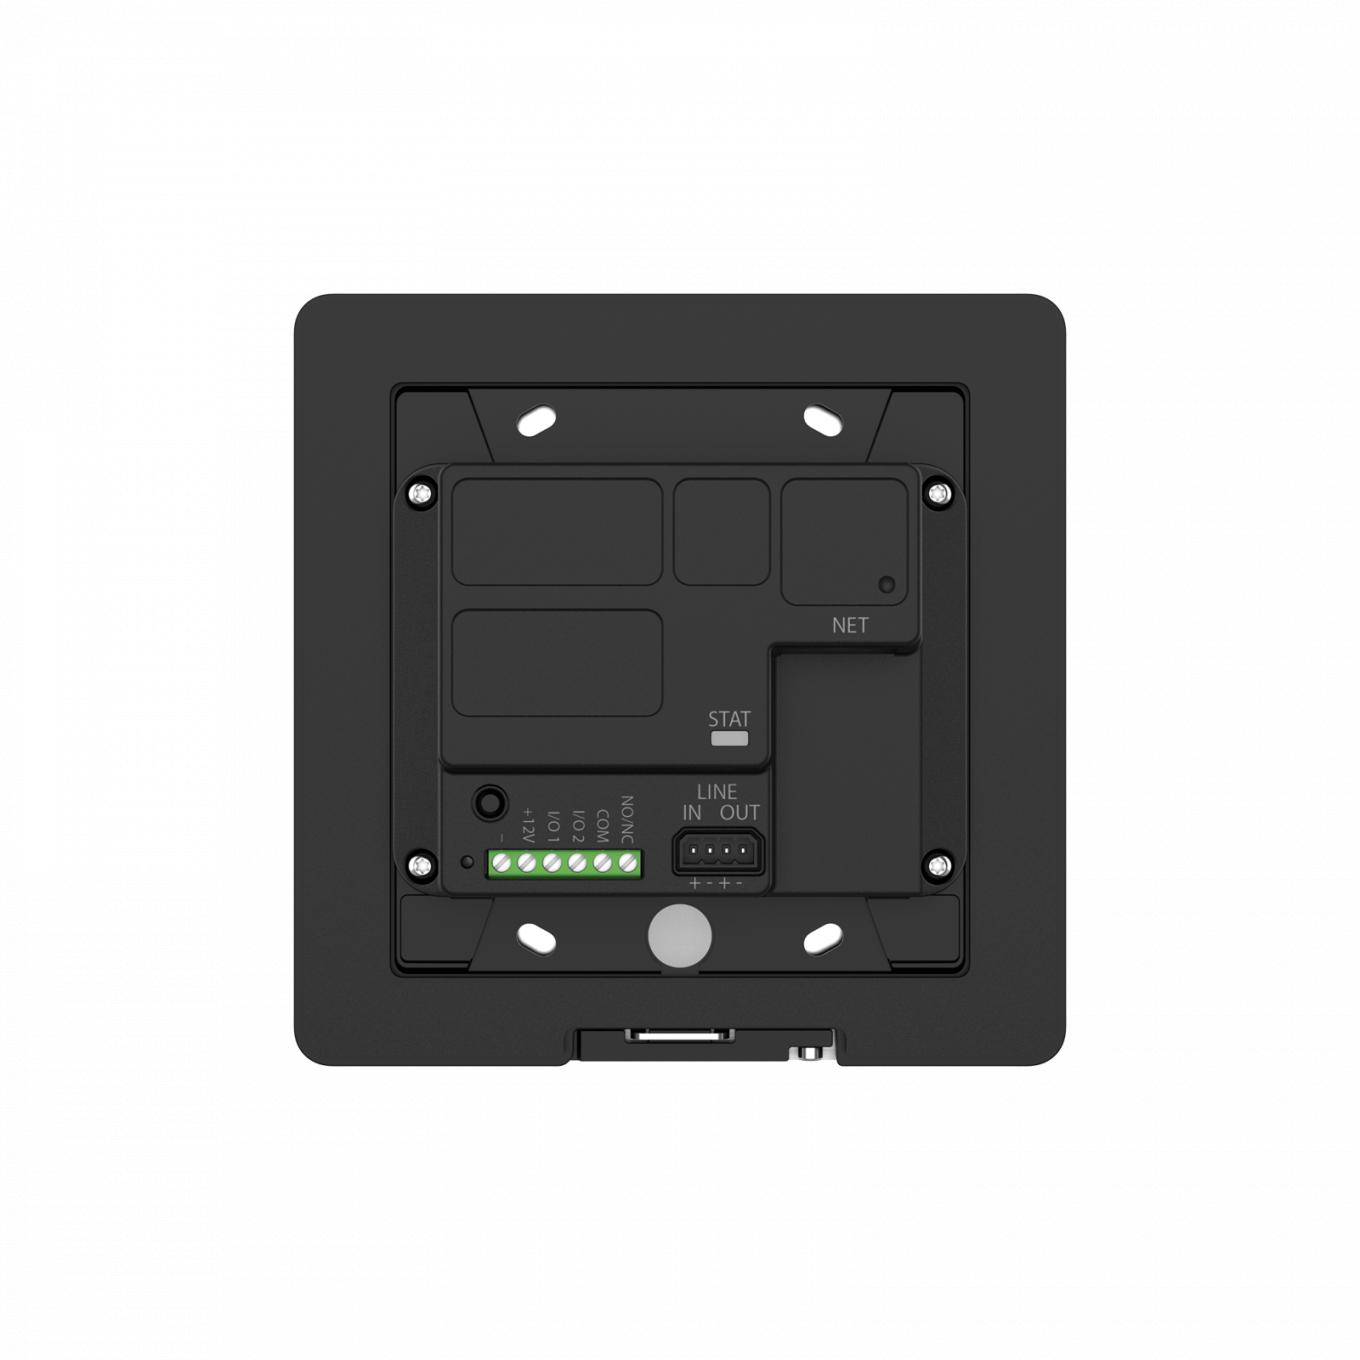 AXIS I8016-LVE Network Video Intercom, viewed from its back